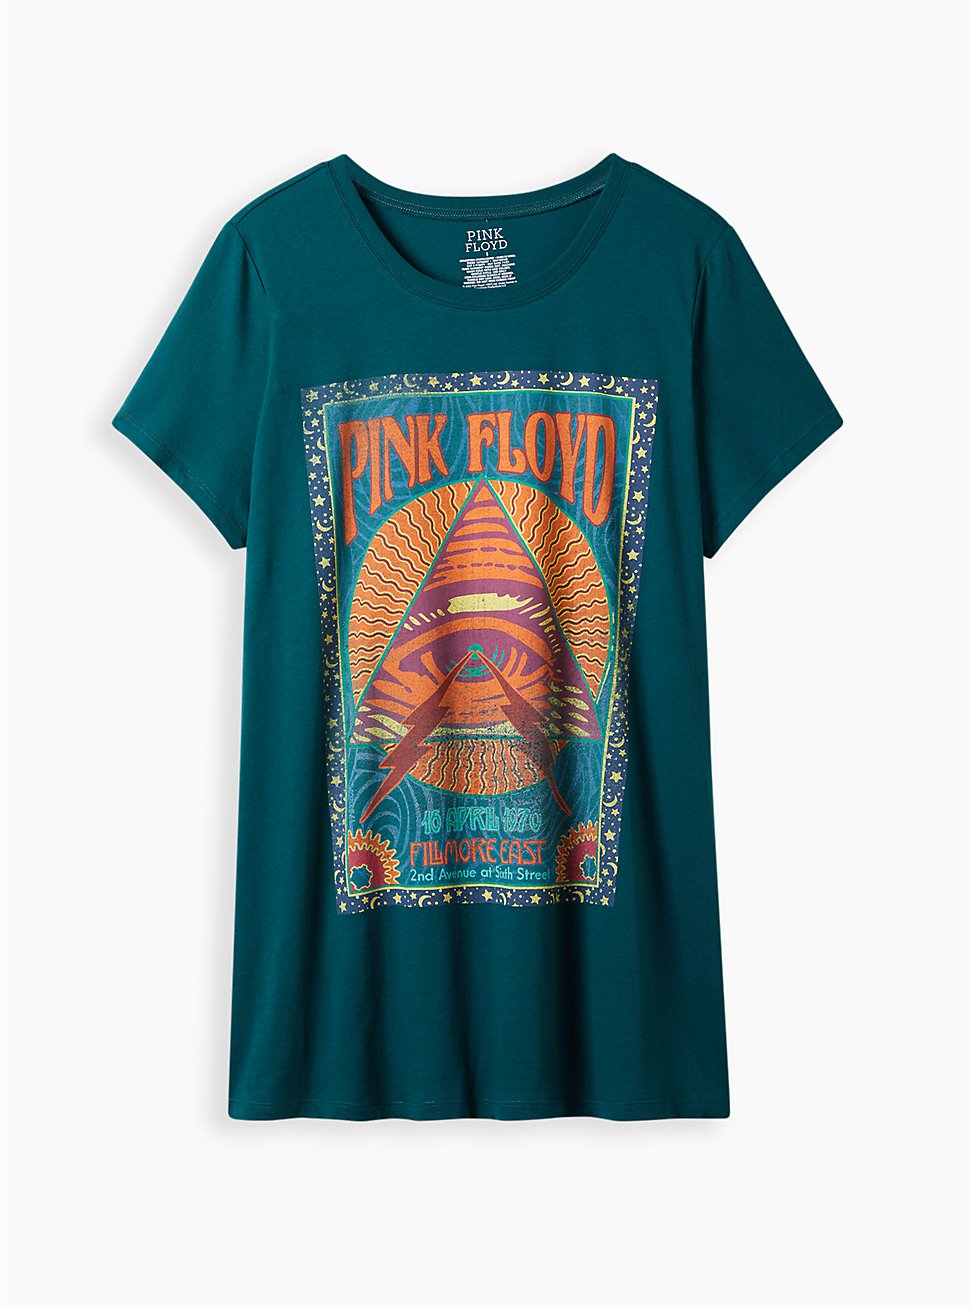 Classic Fit Tunic Tee - Pink Floyd Teal, TEAL, hi-res